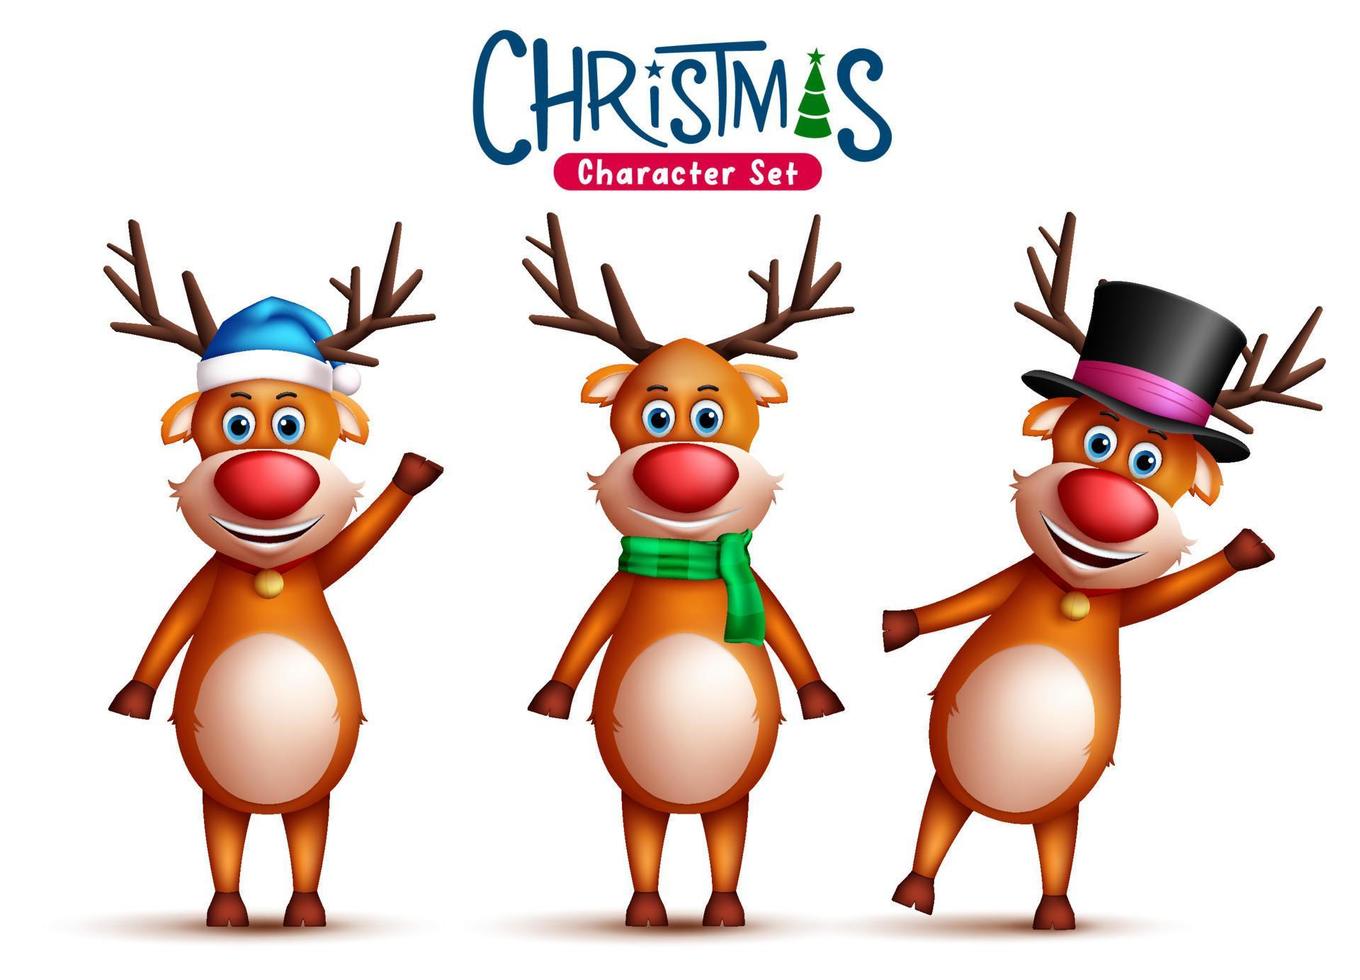 Reindeer christmas character vector set. 3d santa's reindeer characters in cute and jolly facial expressions wearing hat and scarf for xmas collection design. Vector illustration